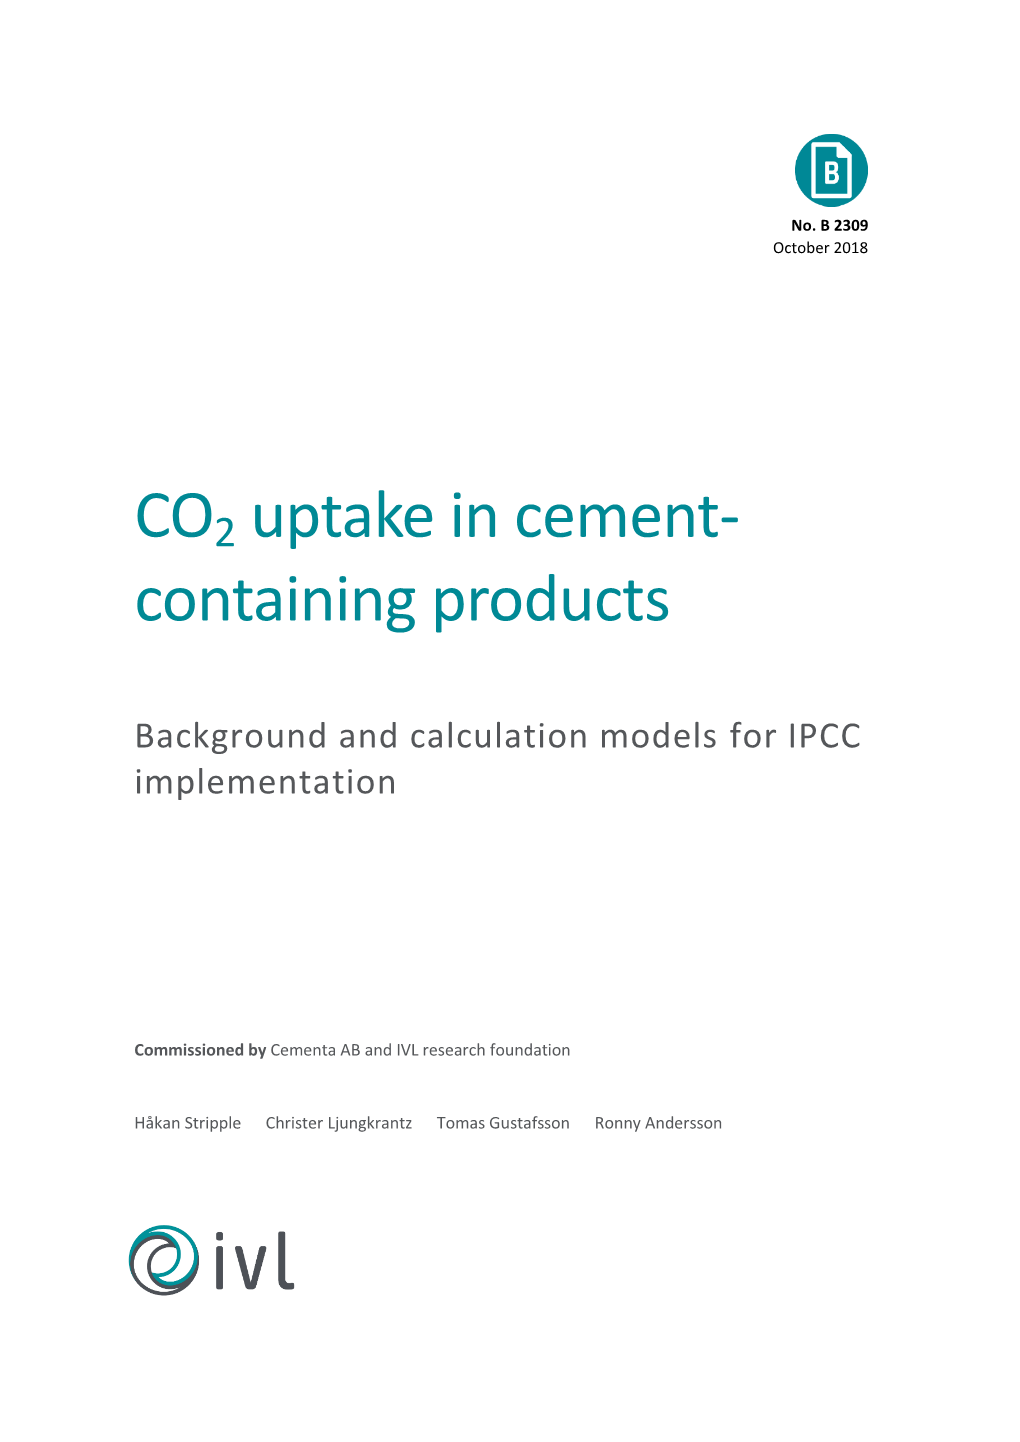 CO2 Uptake in Cement-Containing Products